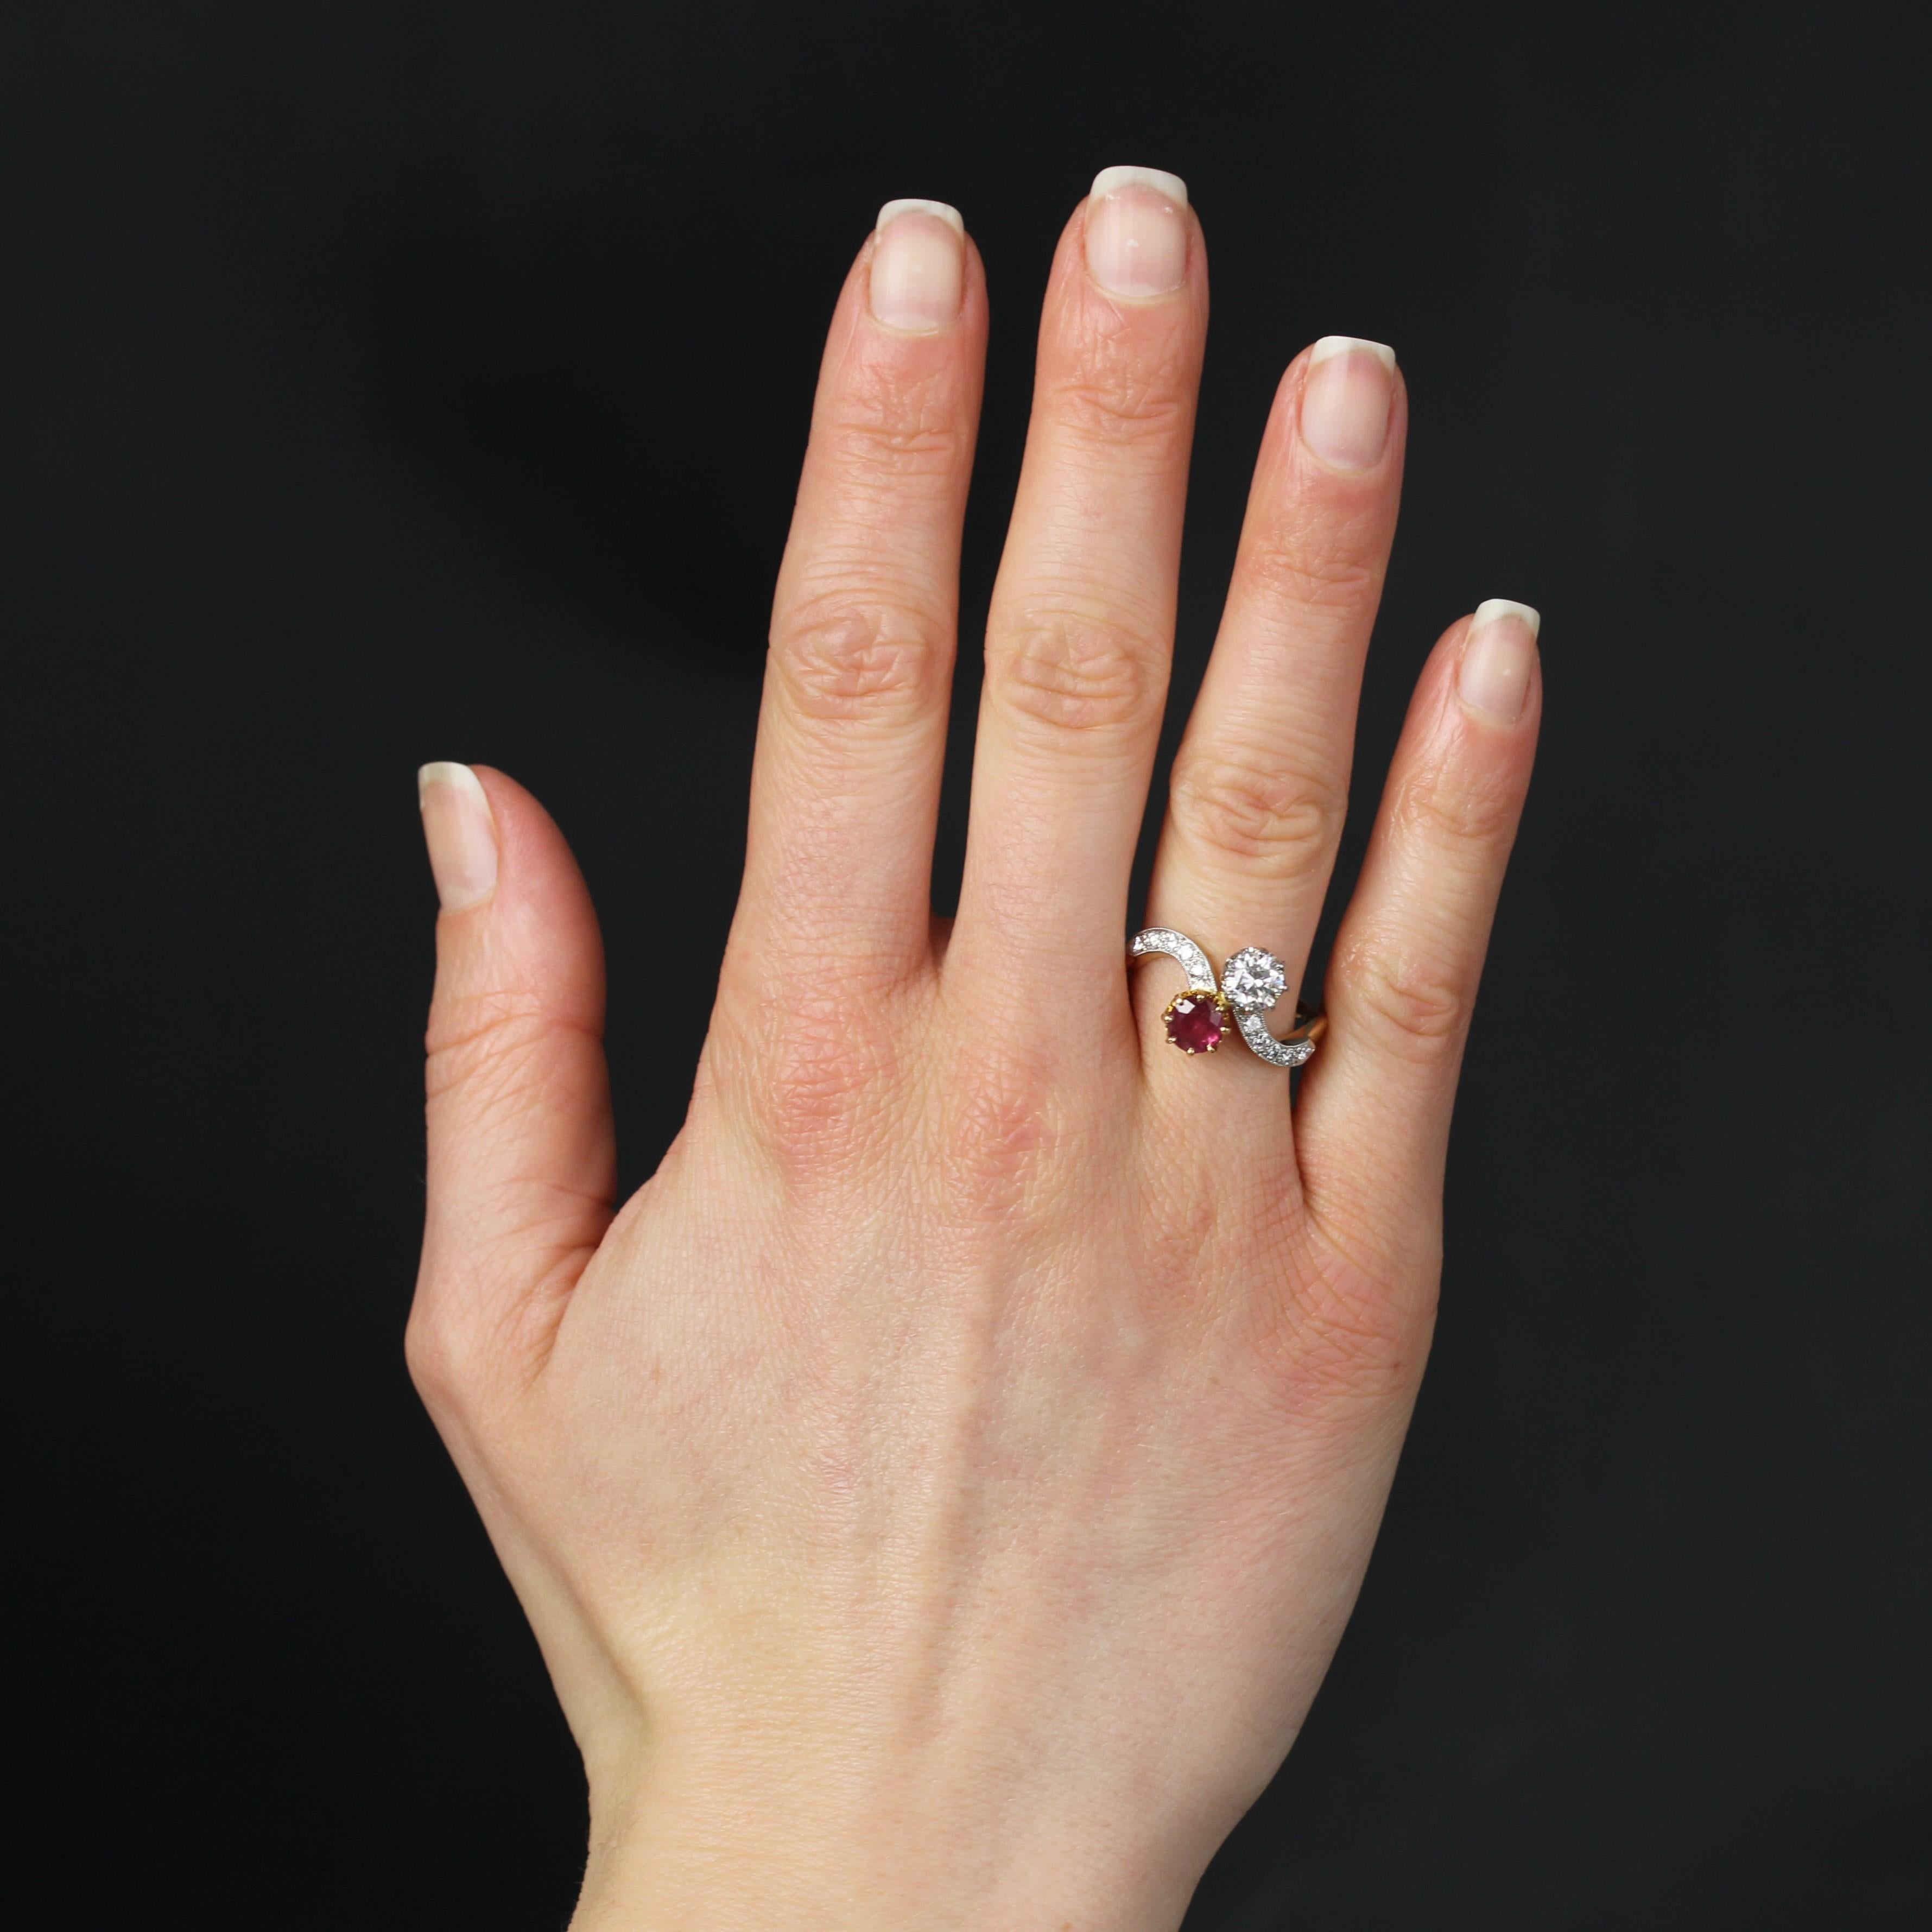 Ring in 18 karat yellow gold and platinum.
An elegant antique ring, it's called You and Me by its 2 main stones held in claws at the top. One is a brilliant-cut diamond and the other a ruby. The start of the ring forms a curve on either side, each